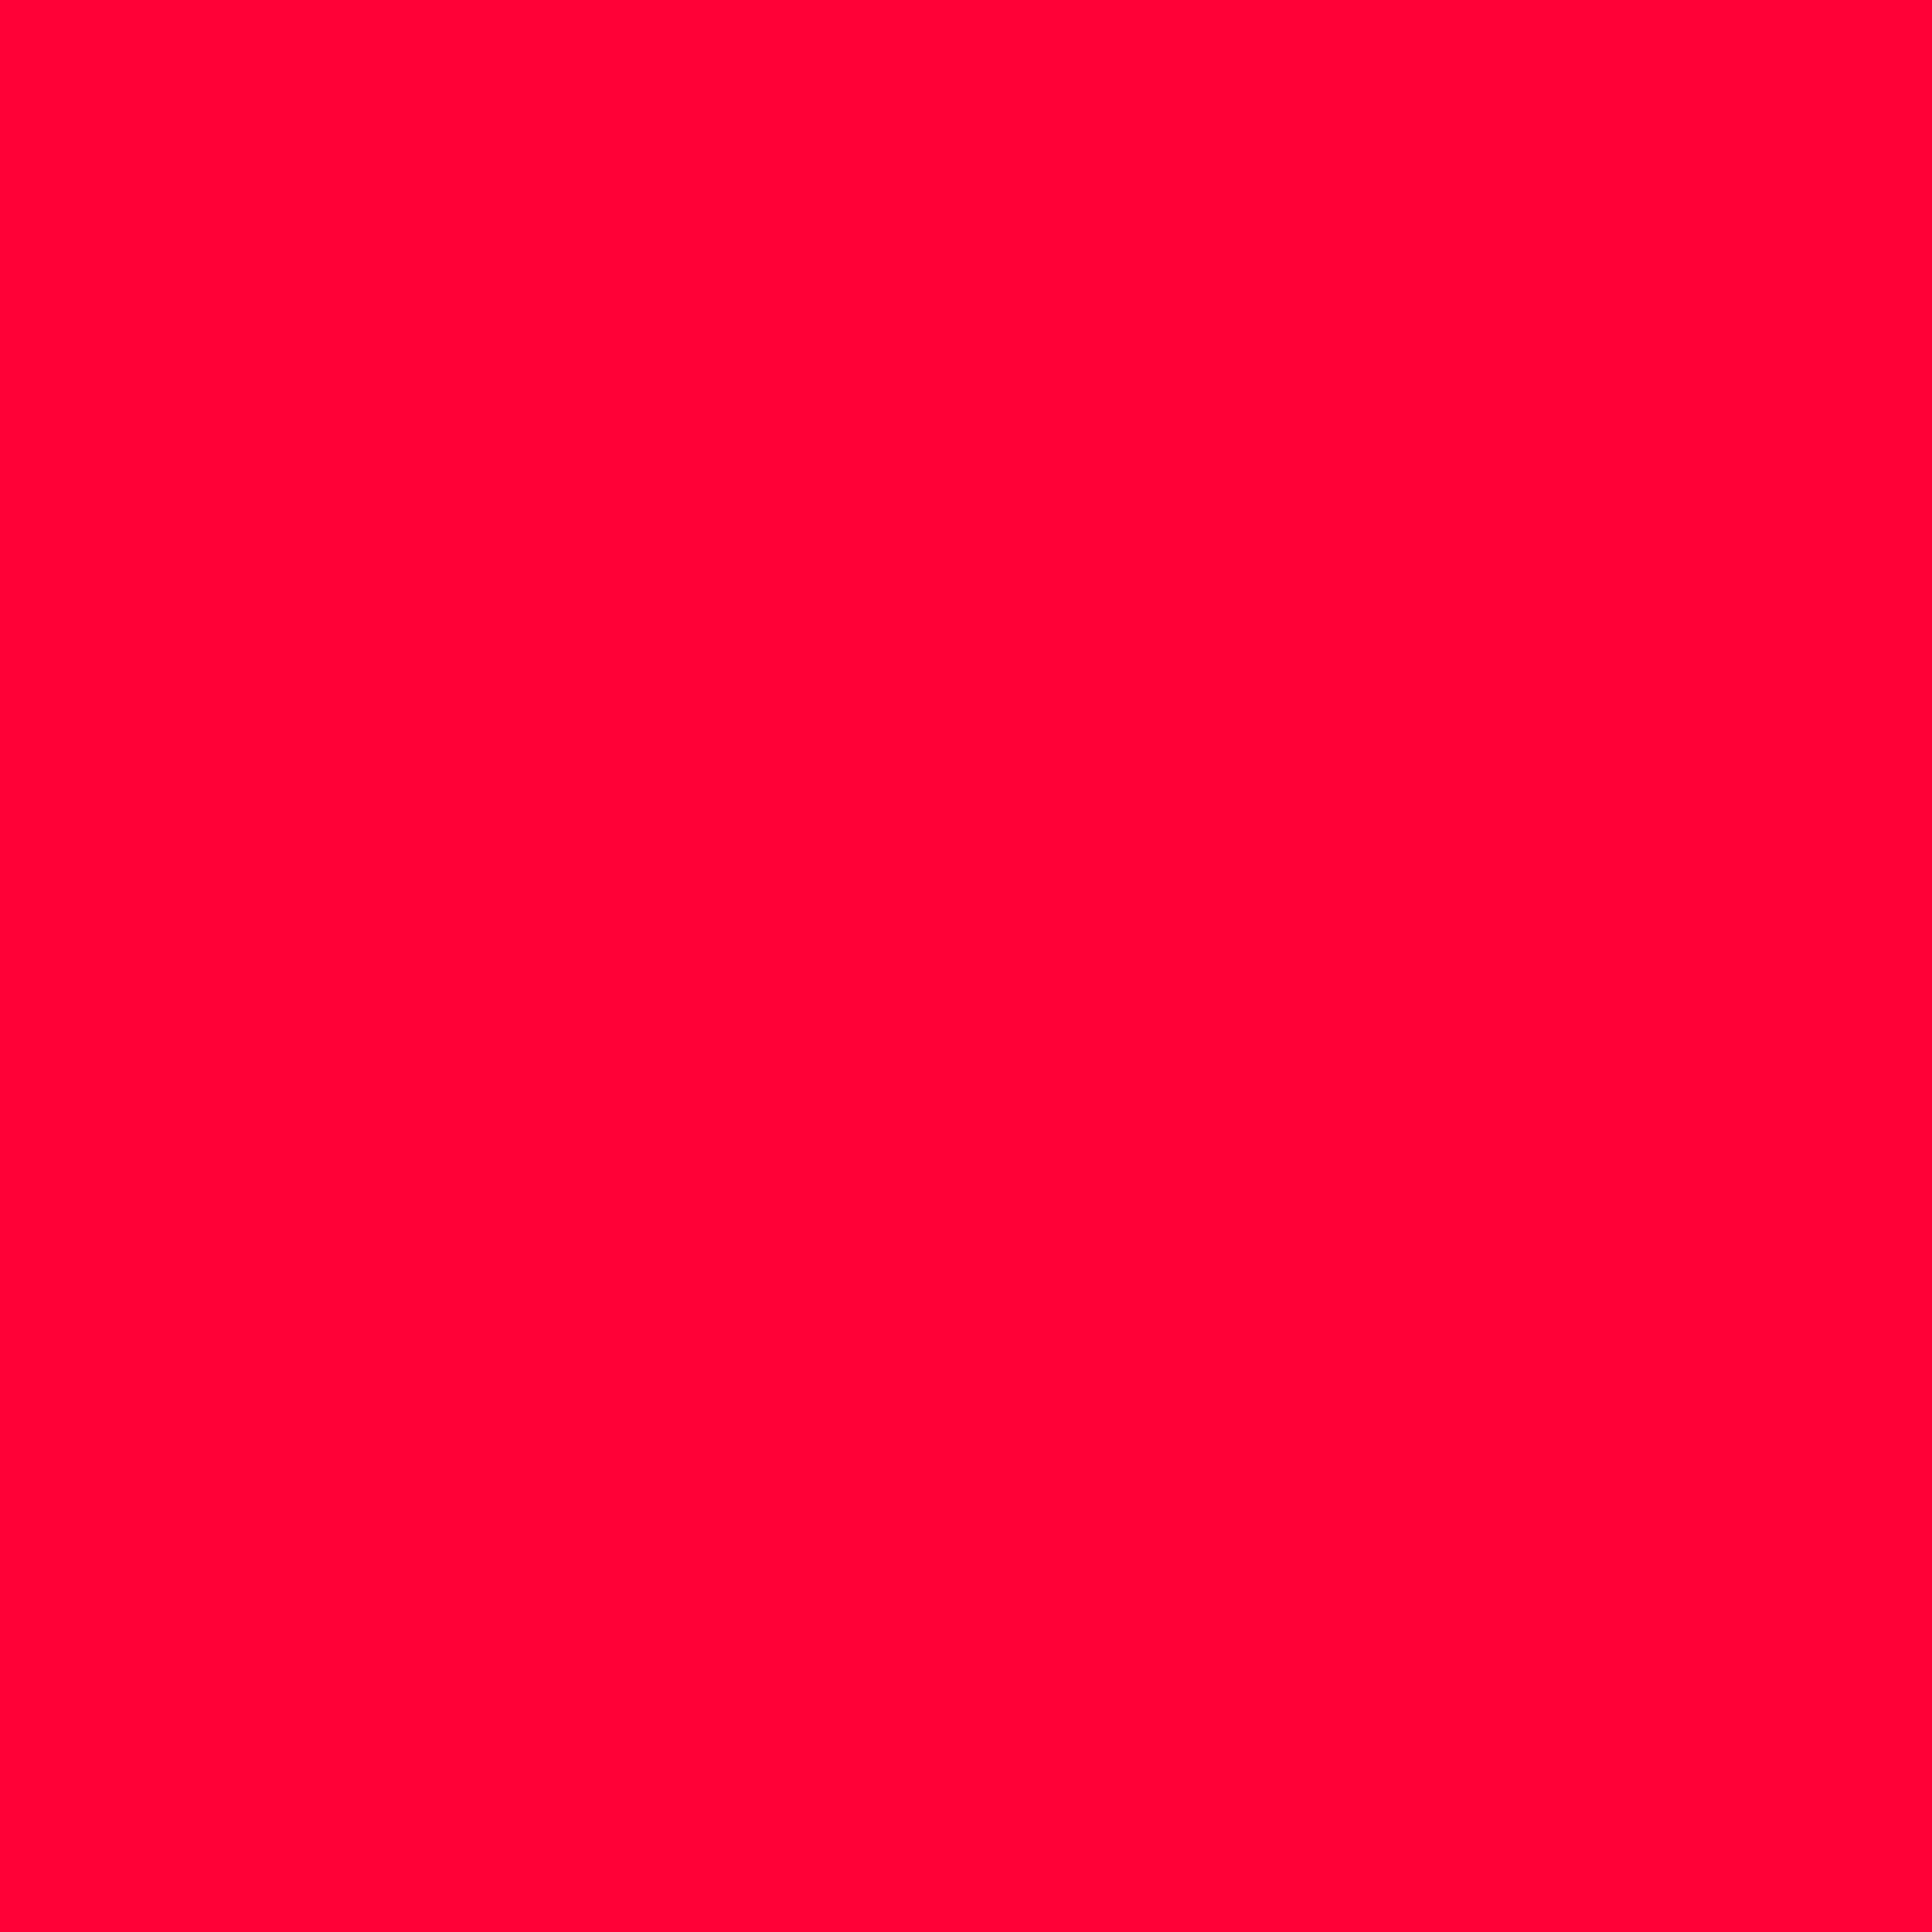 3600x3600 Carmine Red Solid Color Background